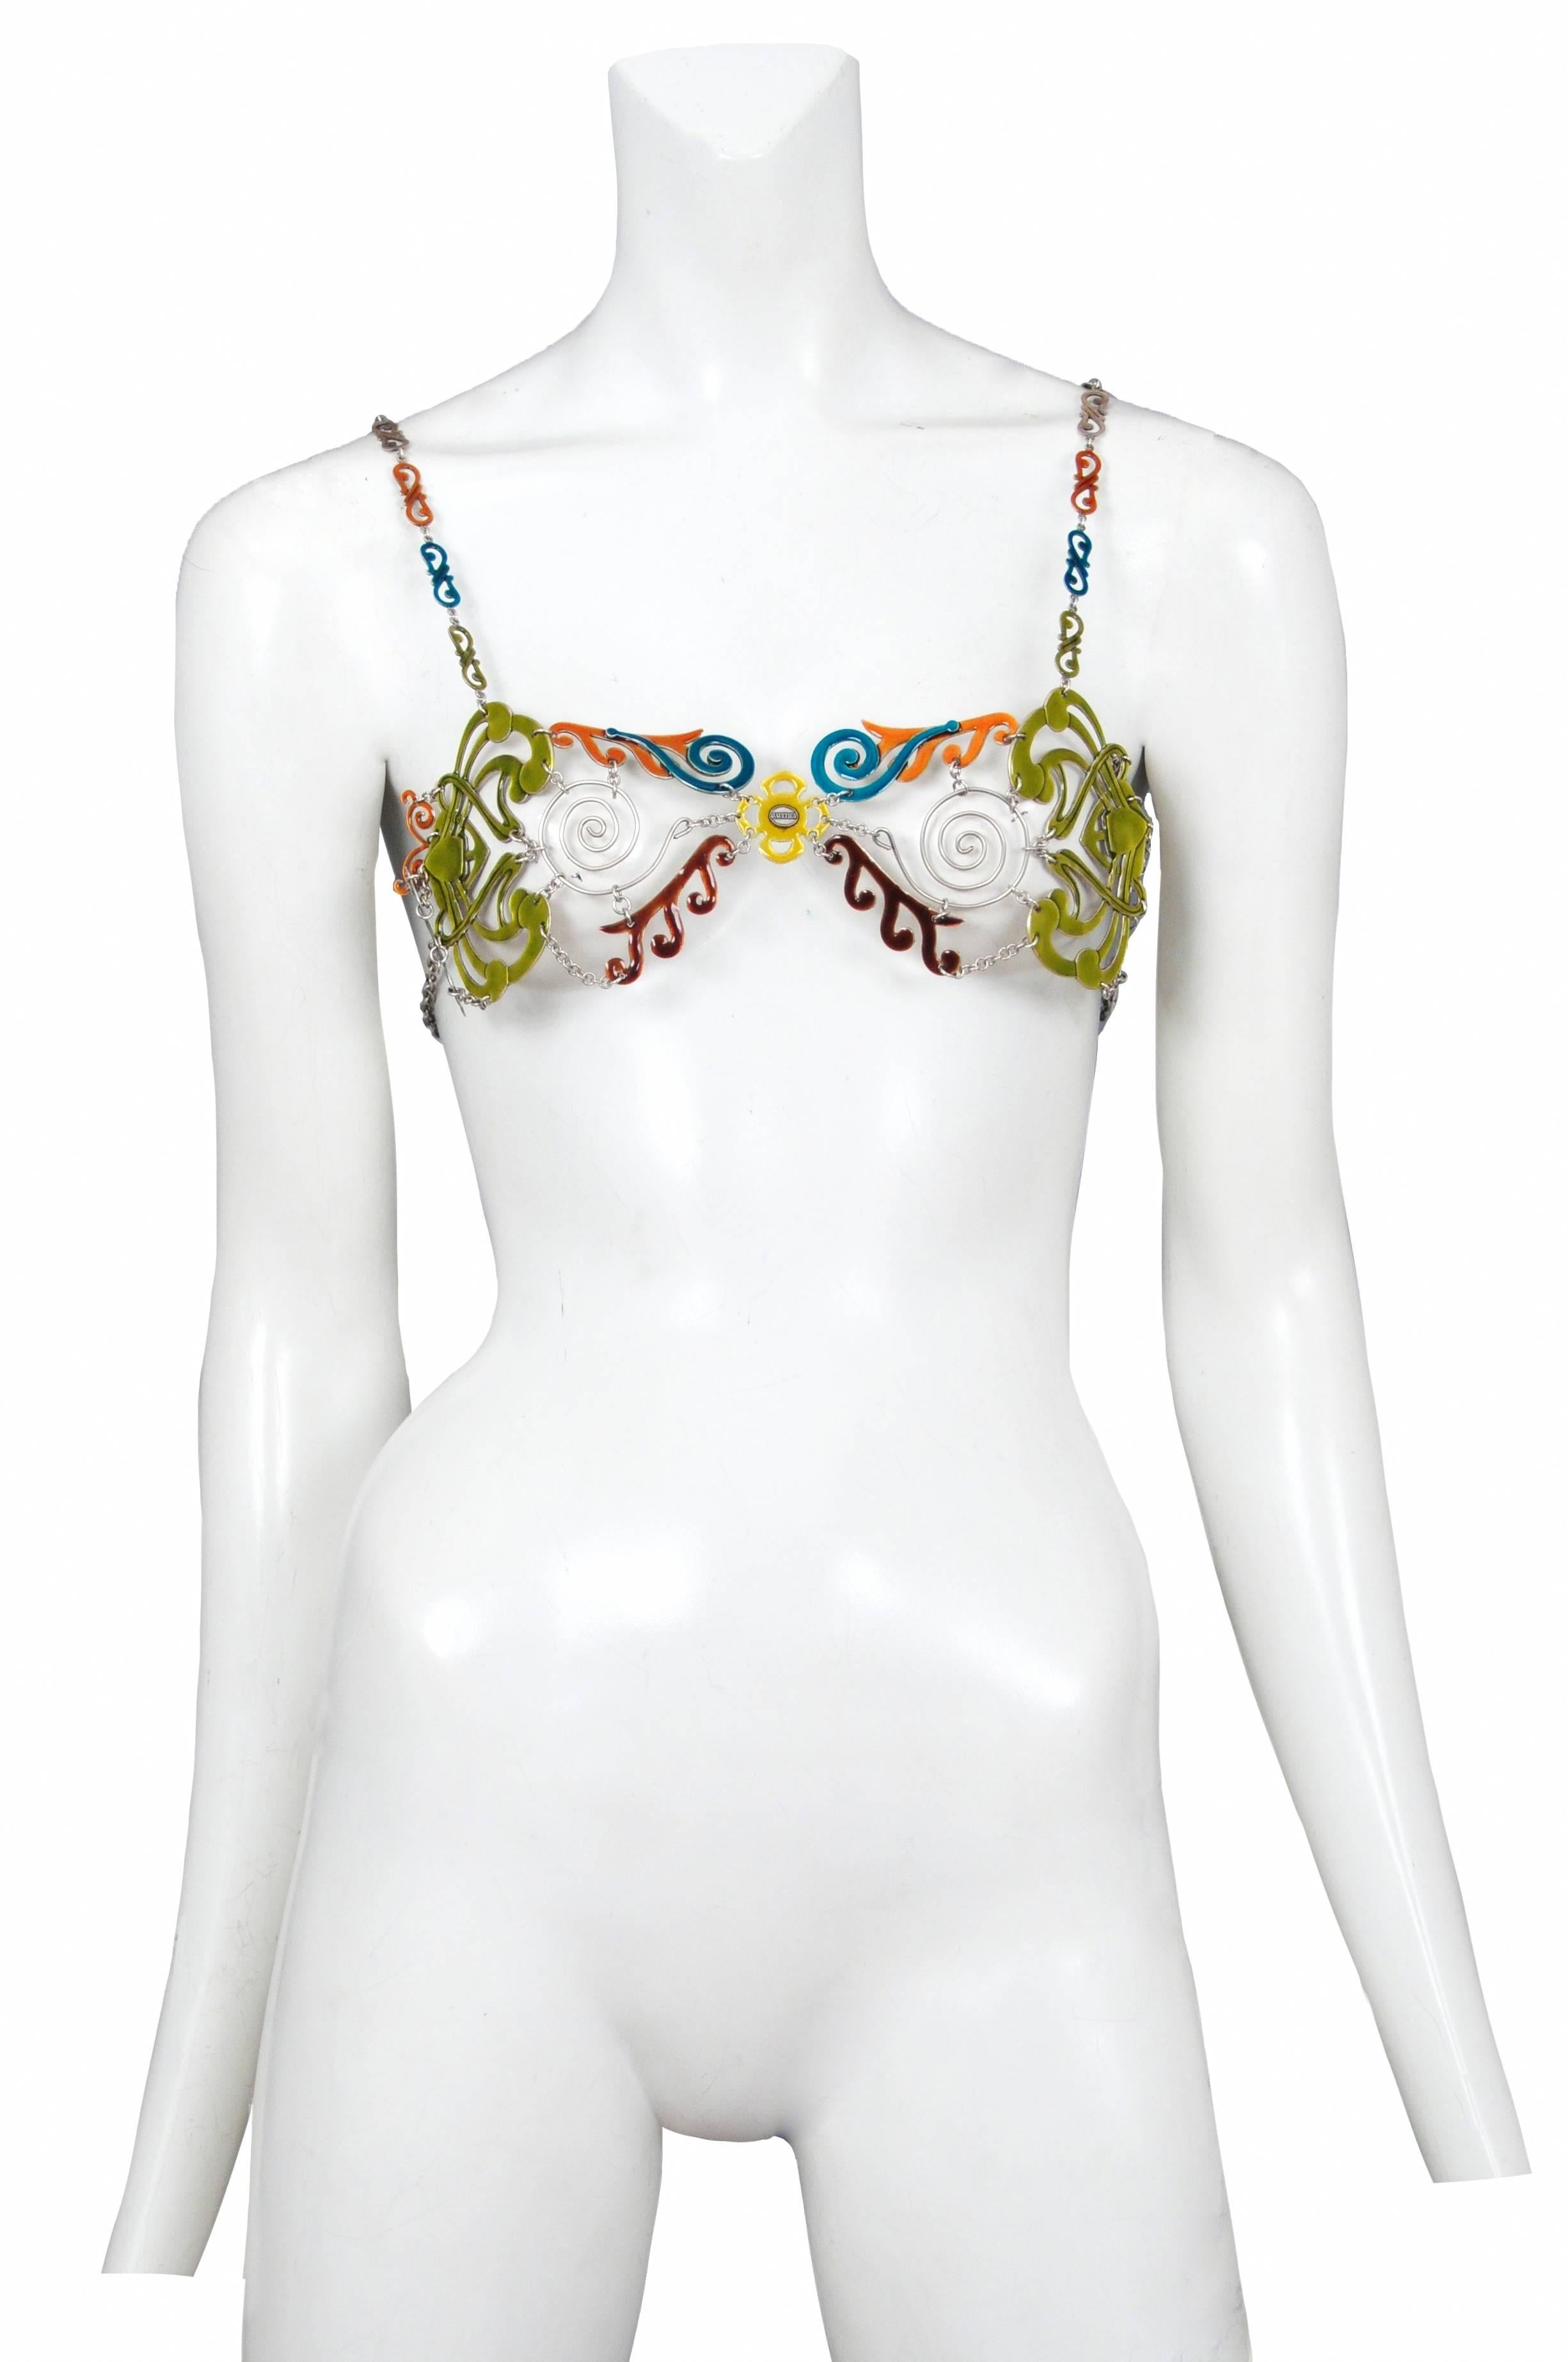 Vintage Jean Paul Gaultier metal wire bra featuring aqua, olive, orange and rust enamel decorating segments of the metal and a Gaultier stamp at the center of the bra.
Bust 32-36in
Please inquire for additional images.